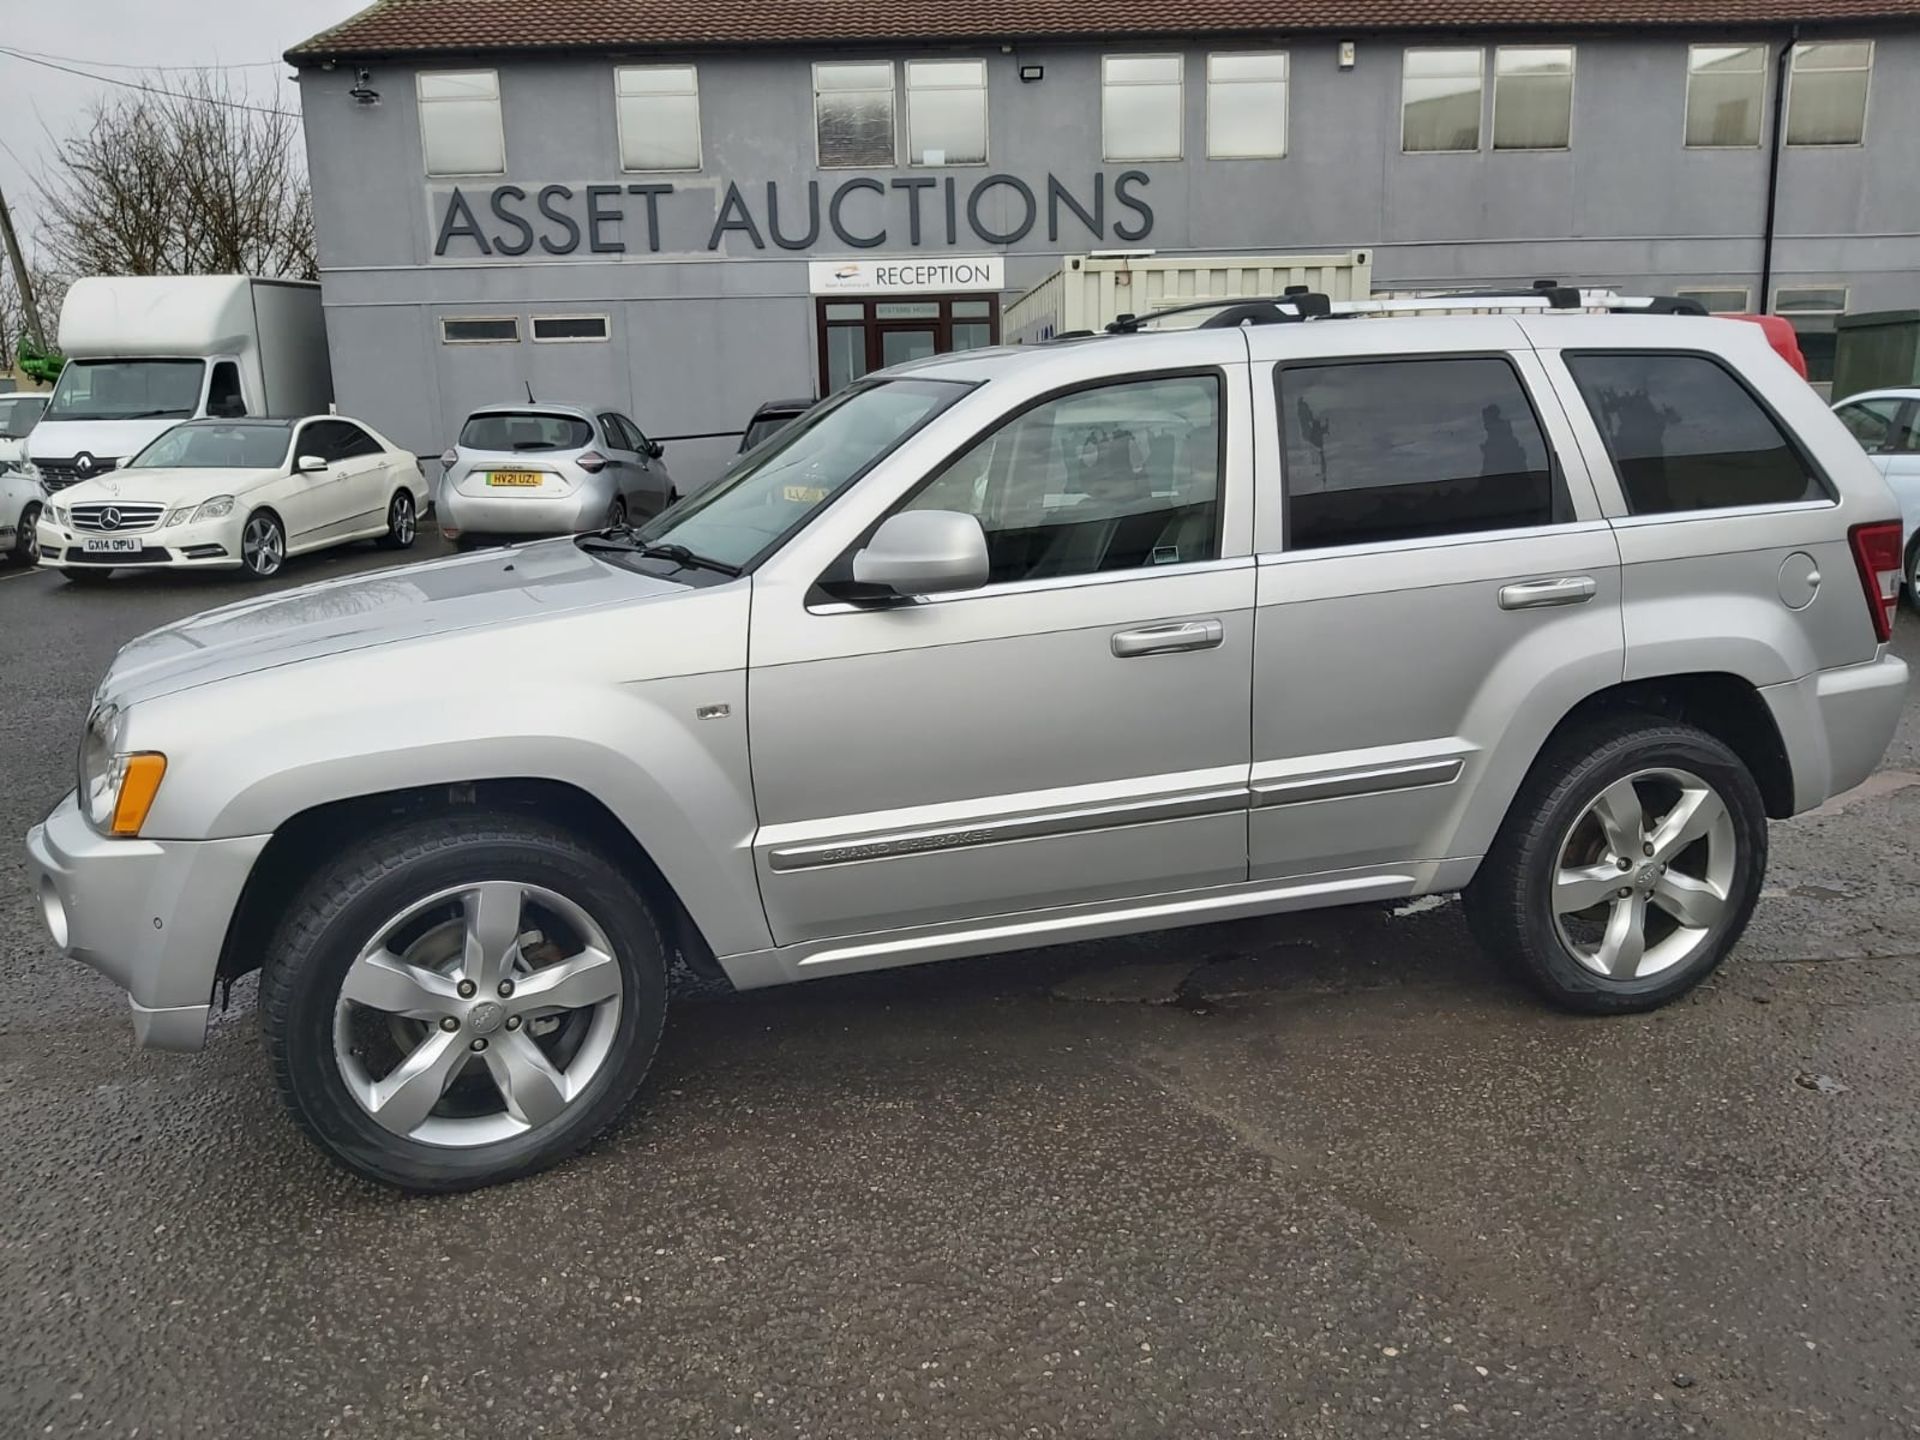 2007 JEEP G-CHEROKEE OVERLAND CRD A SILVER SUV ESTATE *NO VAT* - Image 4 of 17